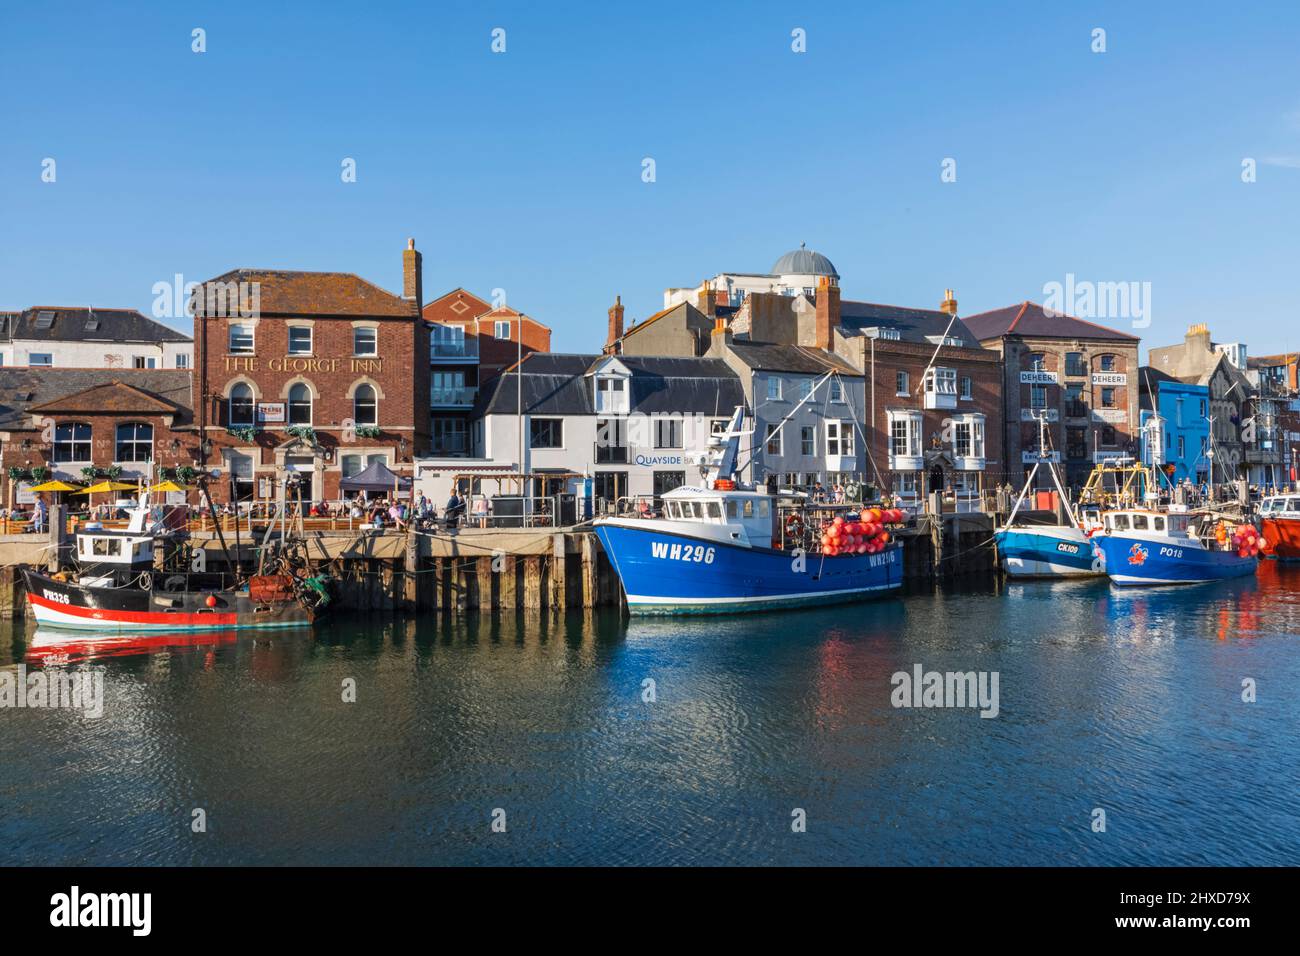 Angleterre, Dorset, Weymouth, port de Weymouth, The George Inn Pub Banque D'Images